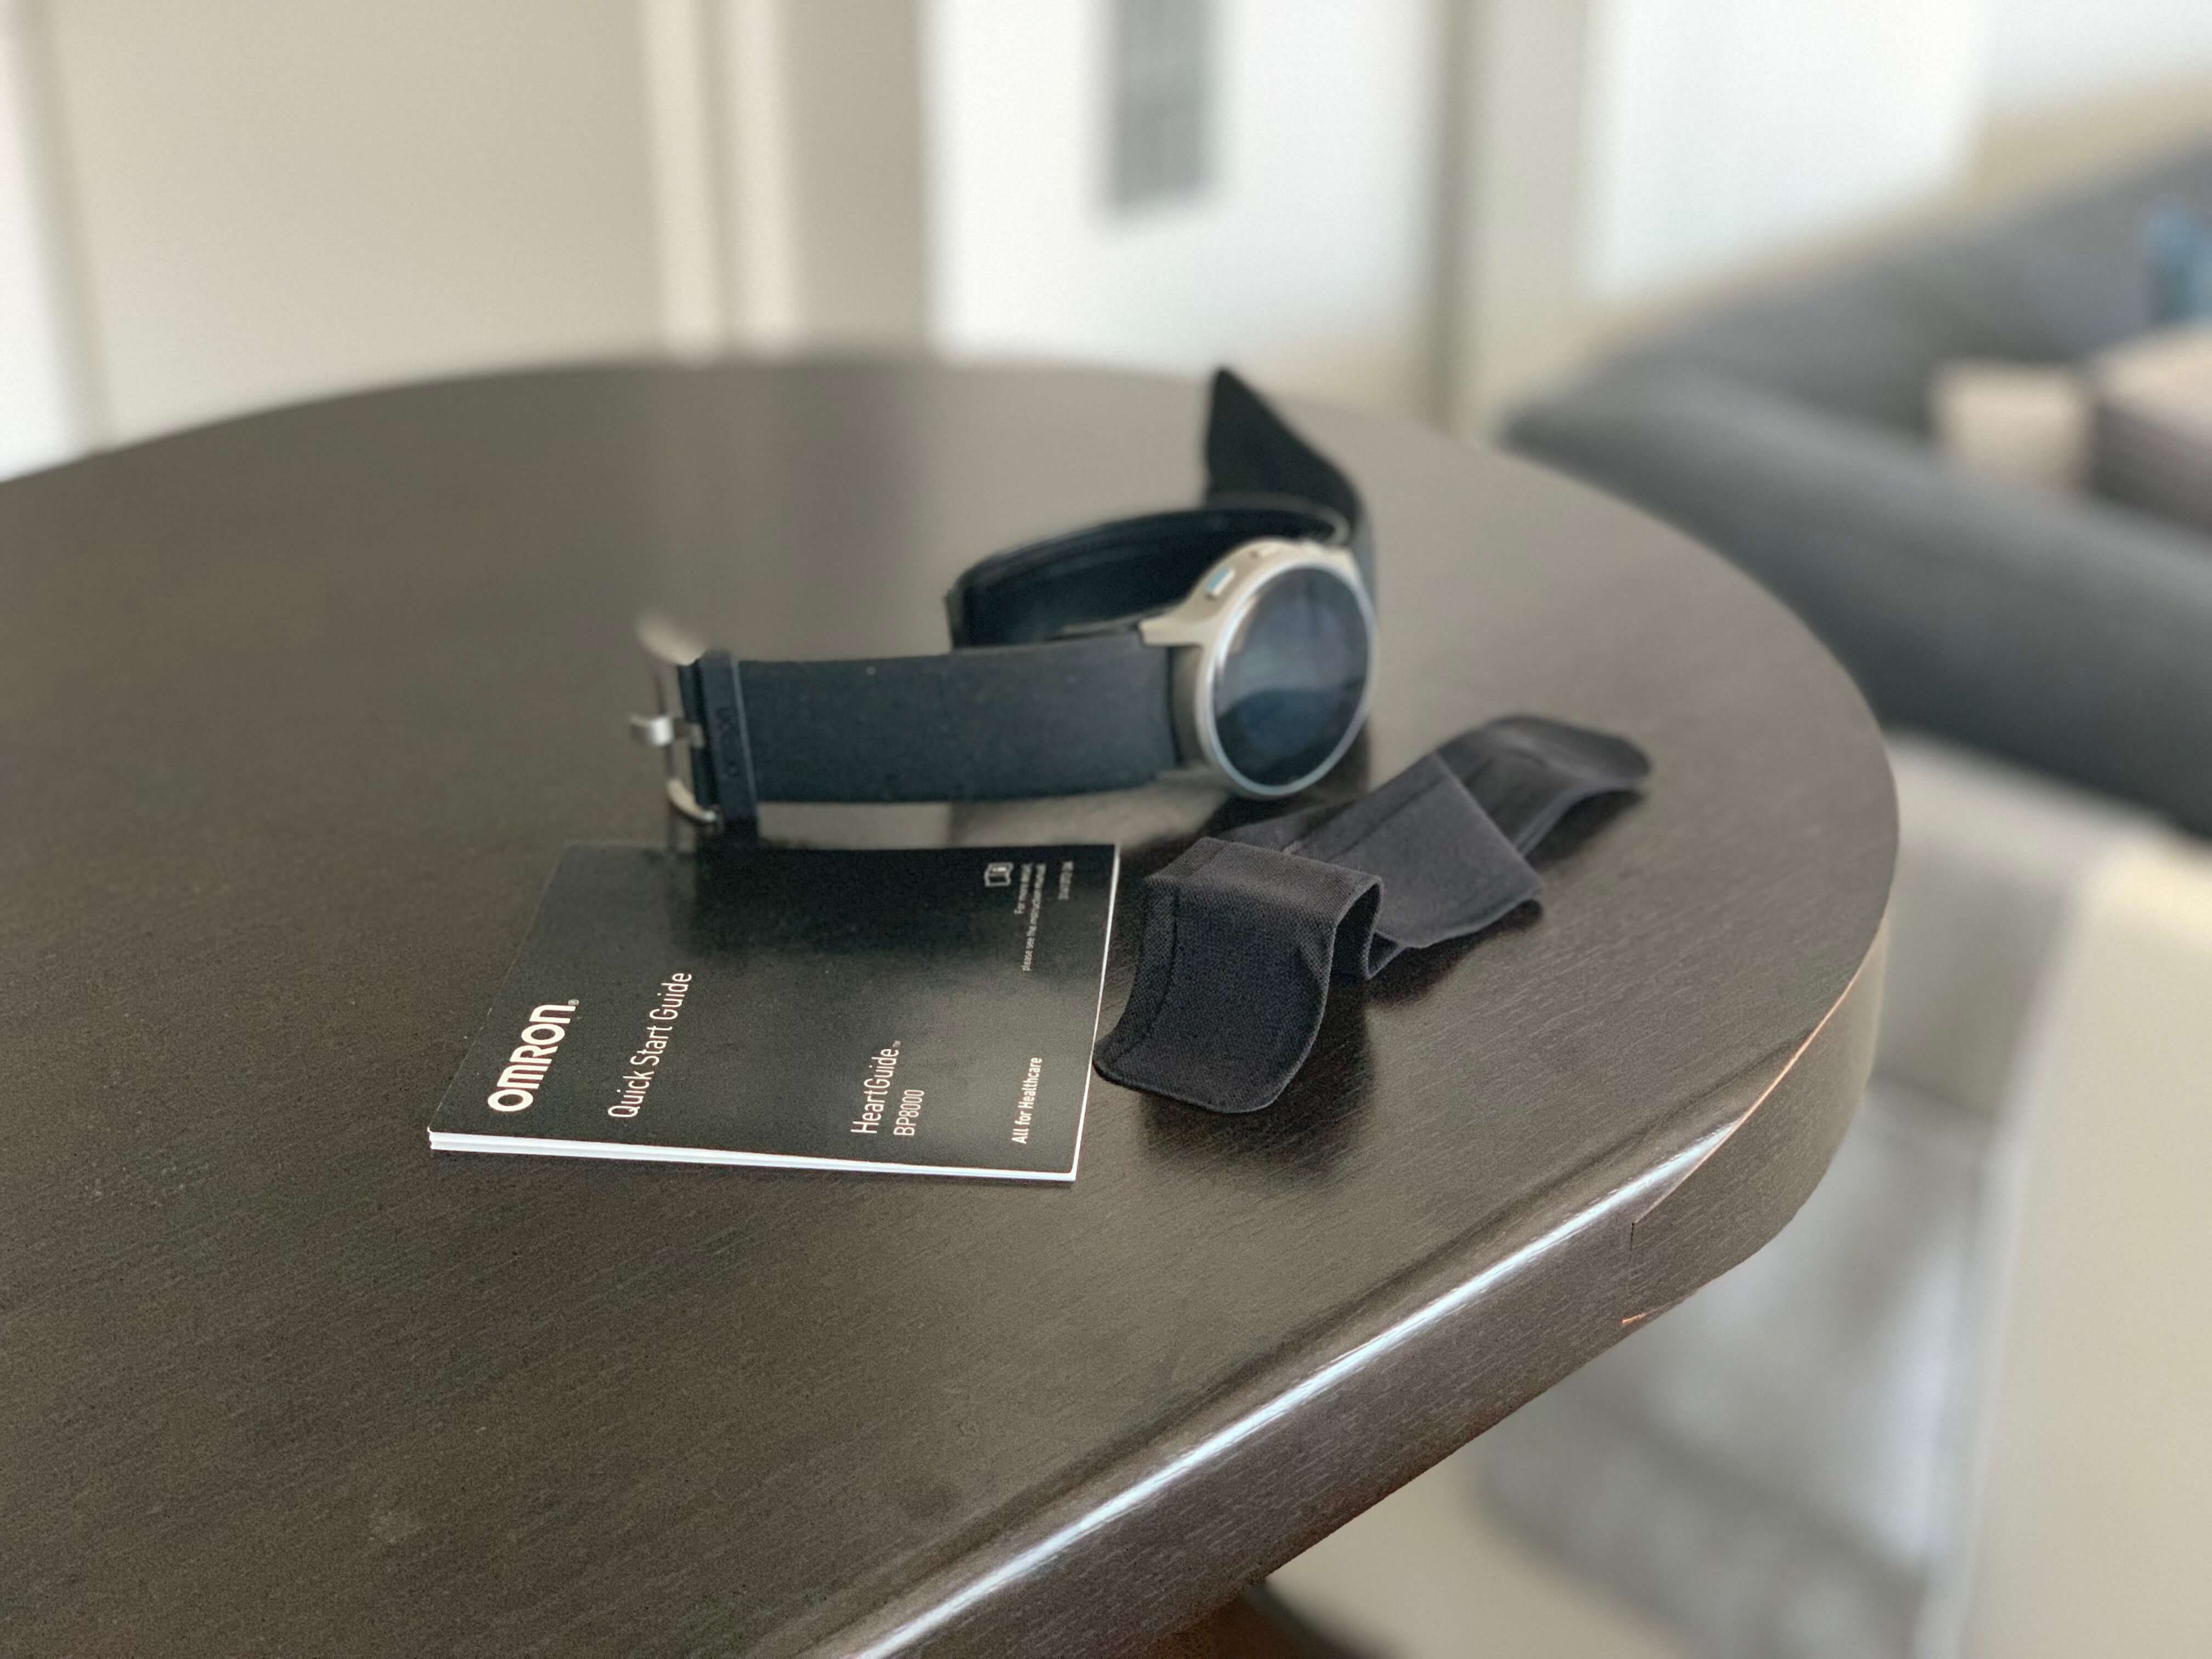 CES 2019: Omron Healthcare Launches First Wearable Blood Pressure